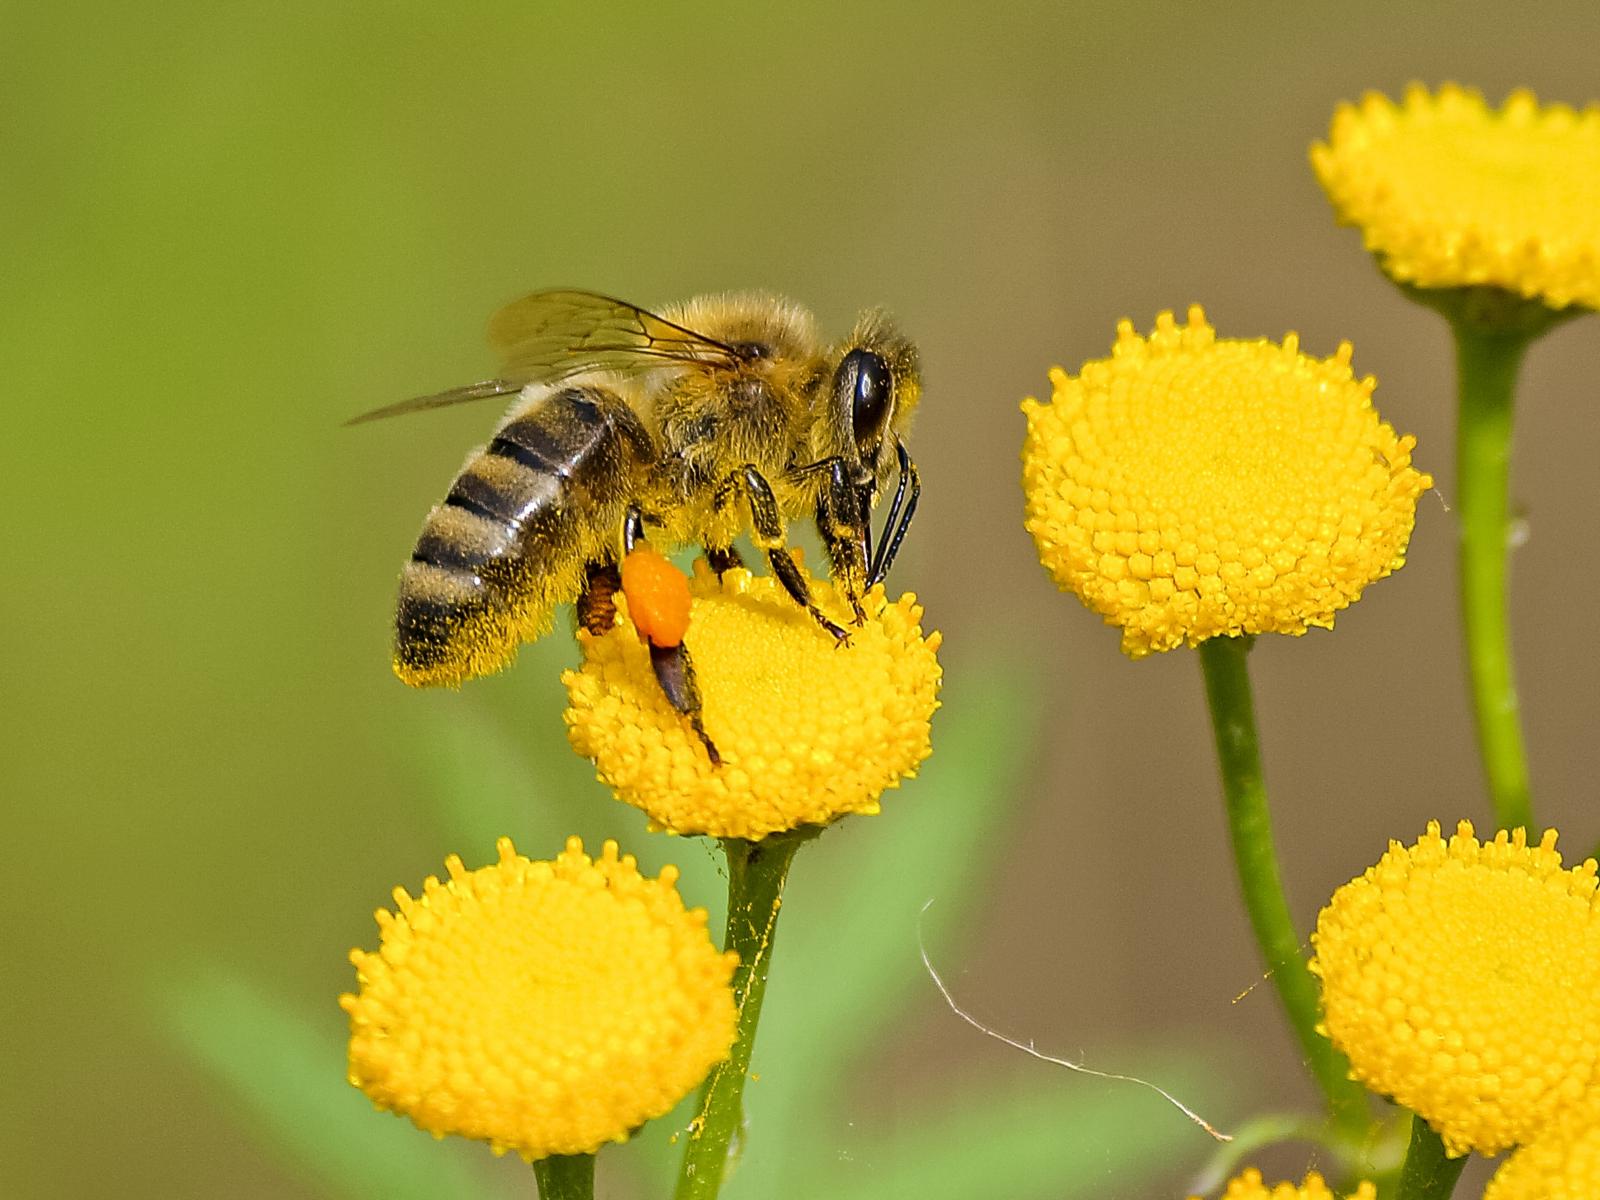 Bee on a flower. Photo credit: Pexels